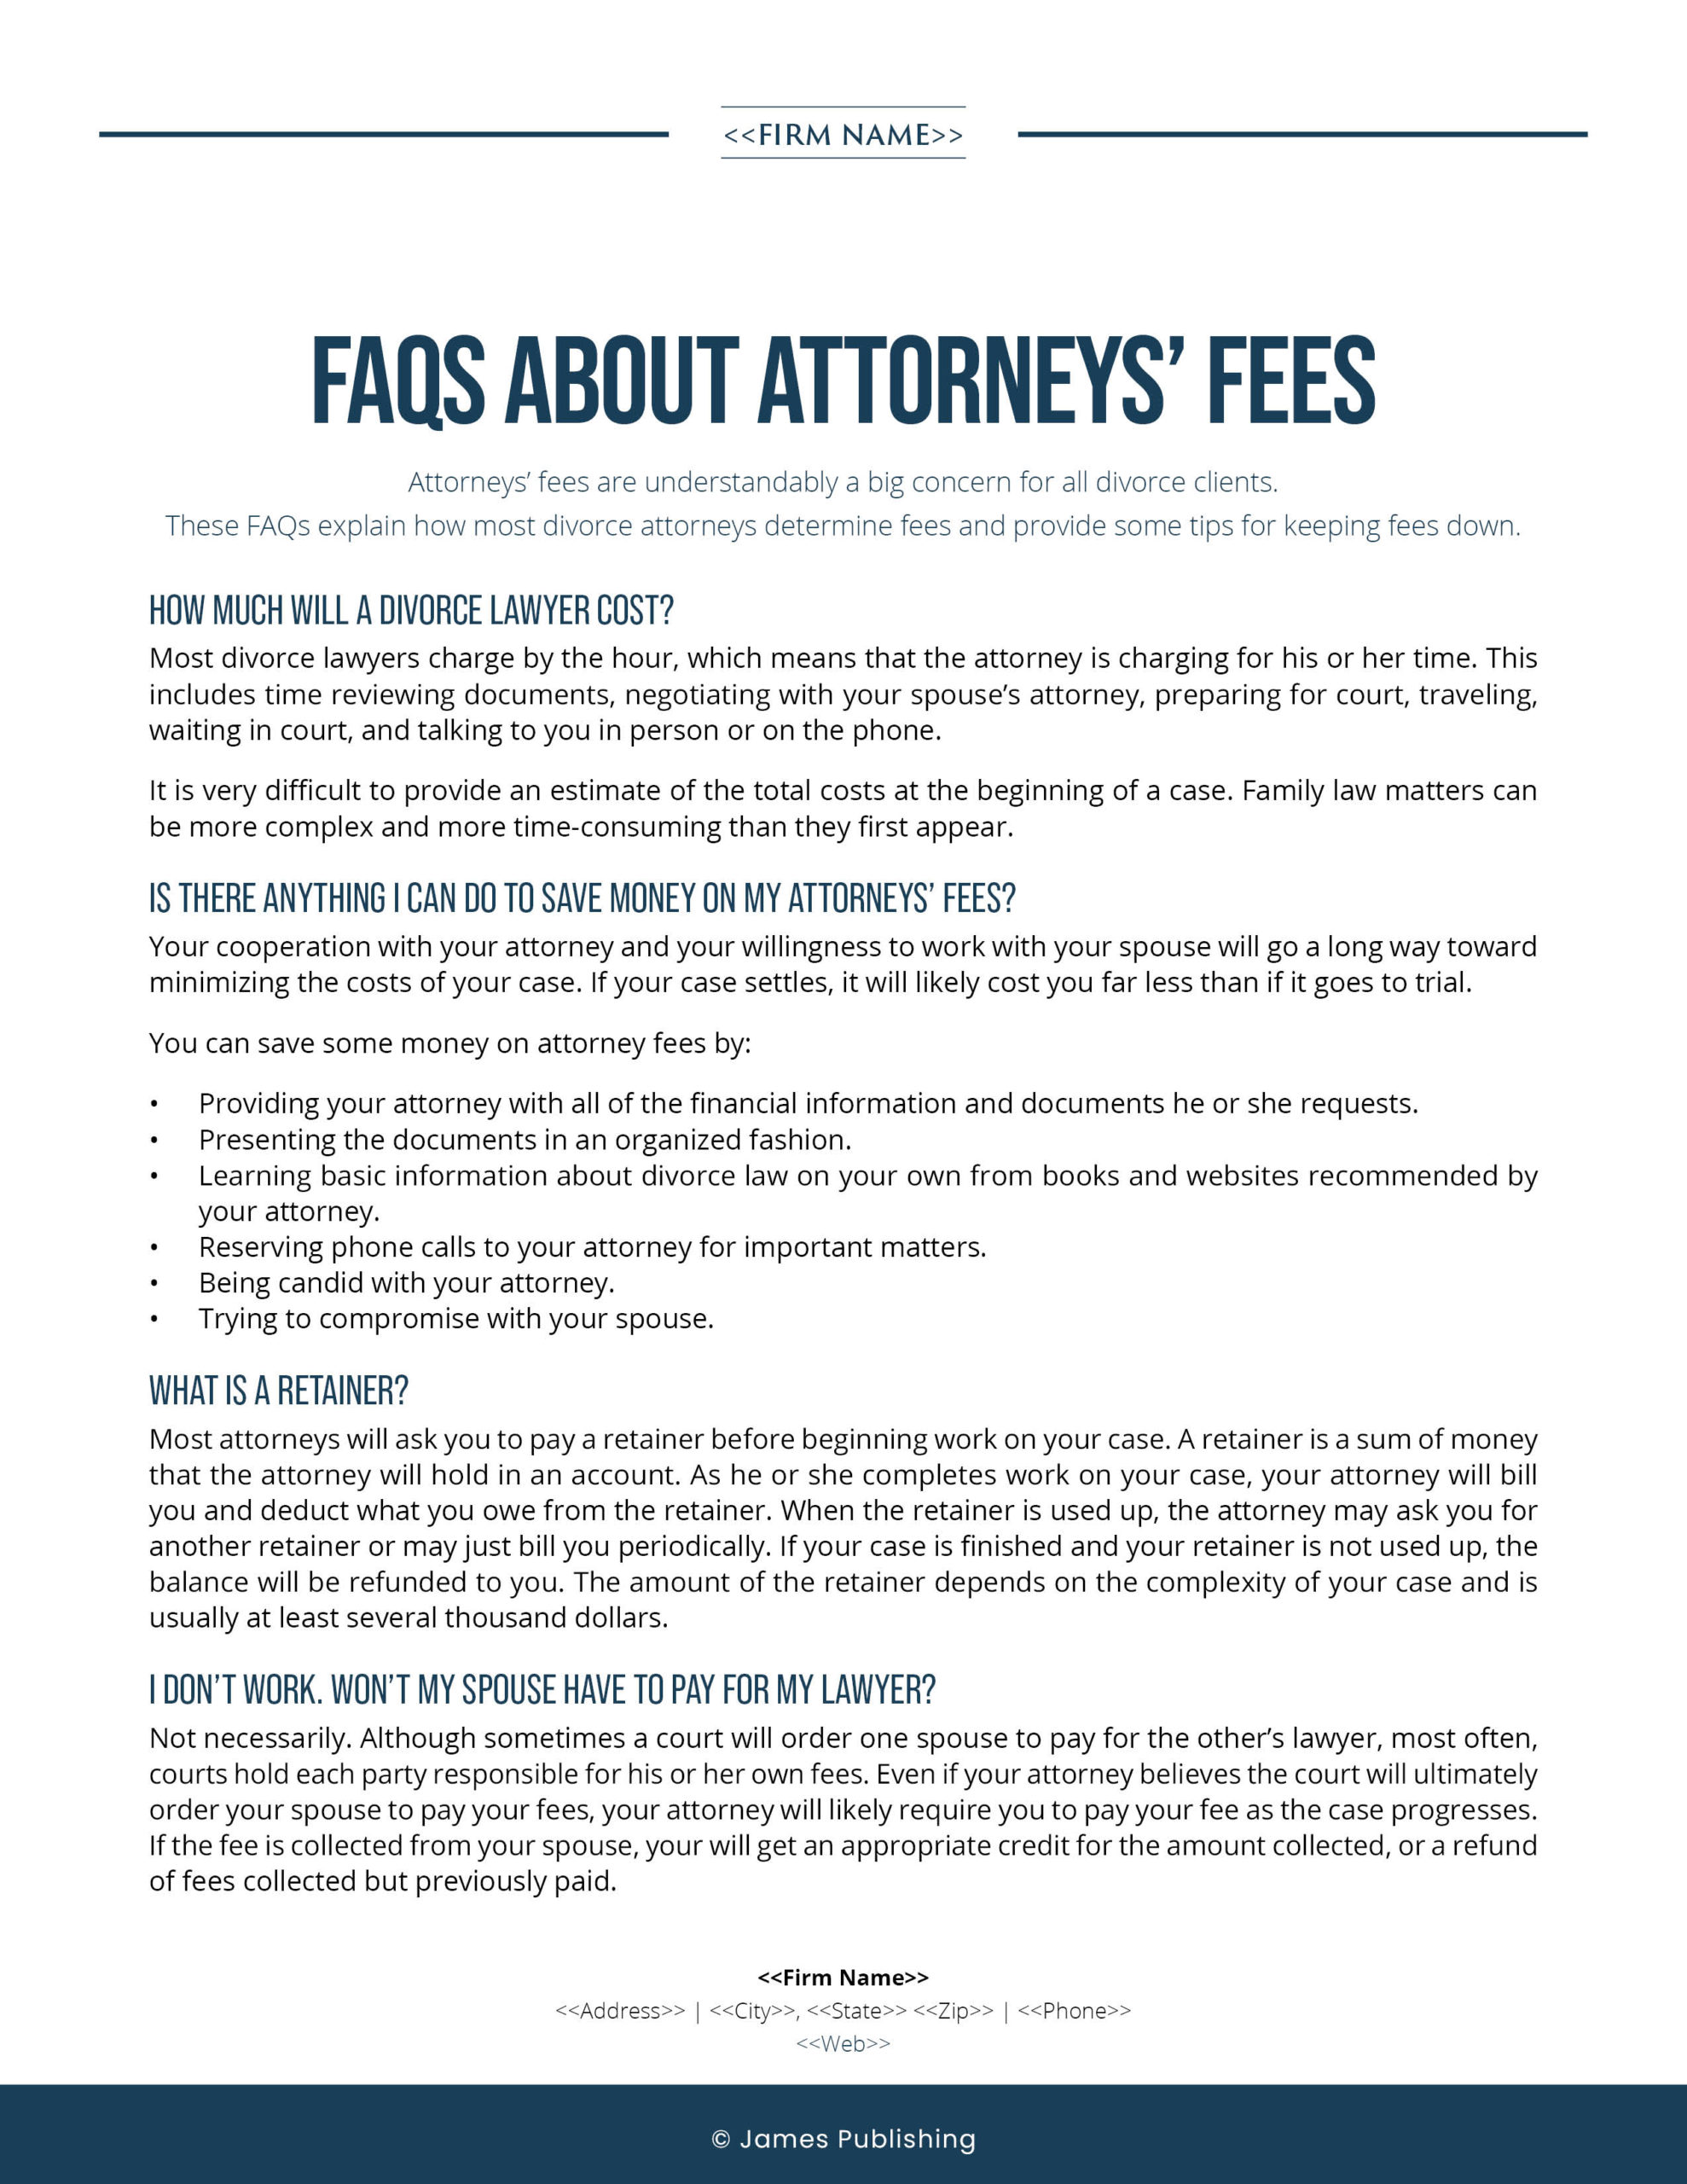 FAM-13 FAQs About Attorneys' Fees